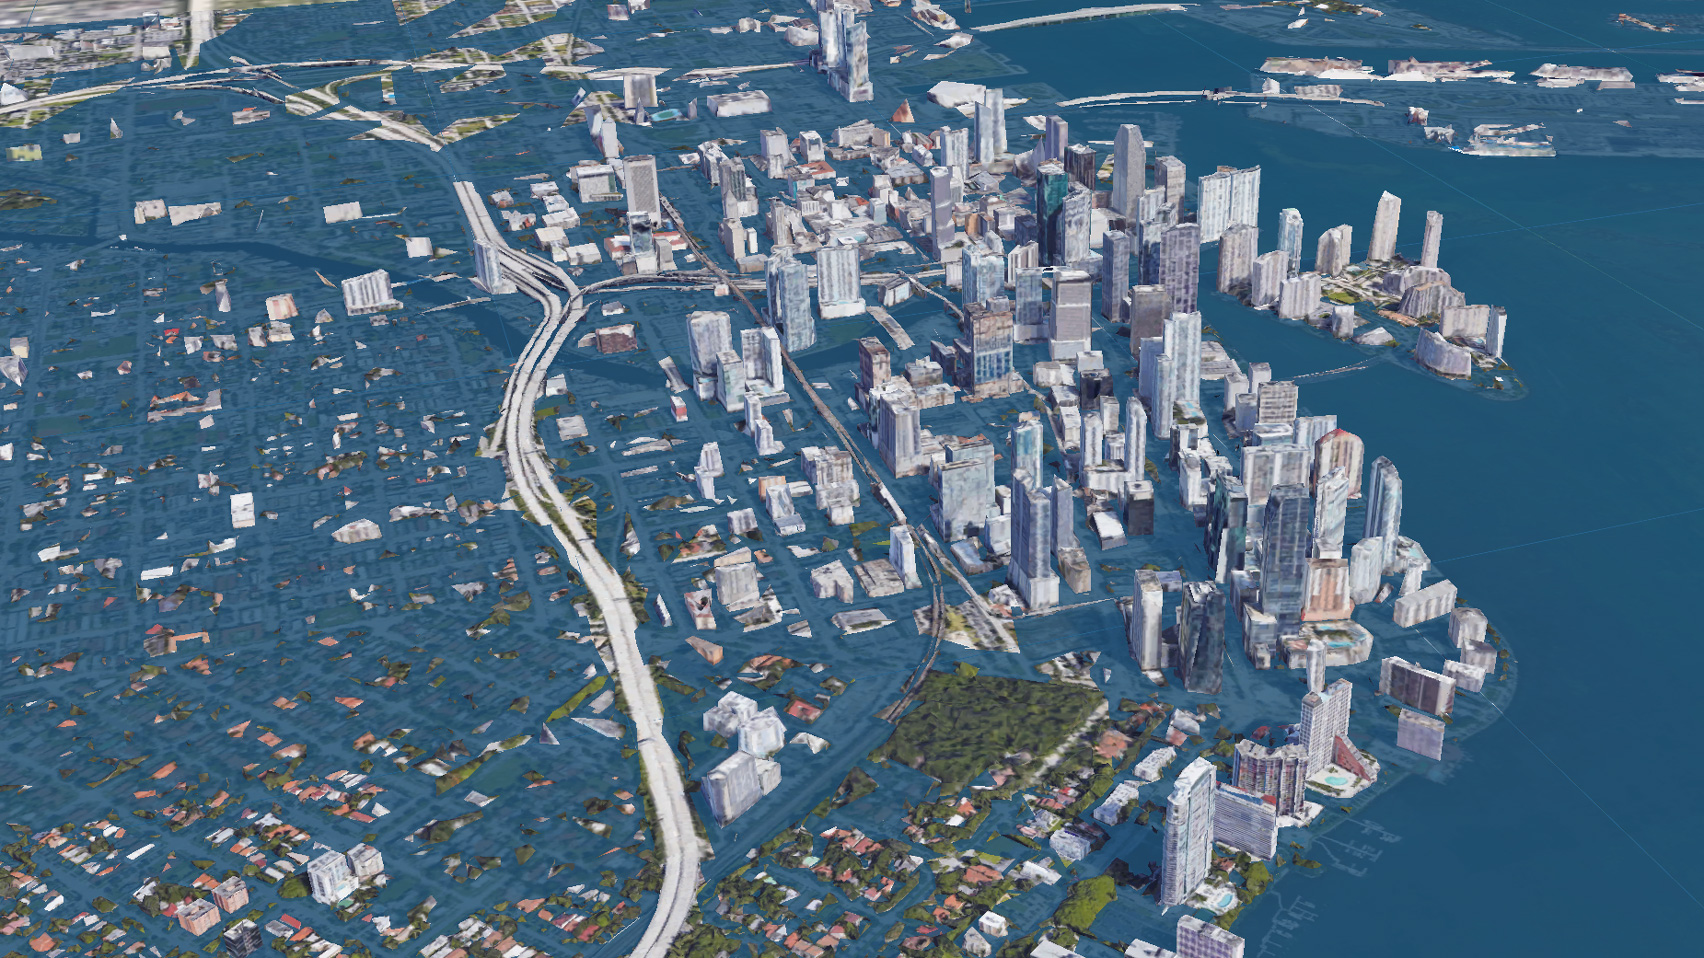 Miami seen using the Surging Seas software